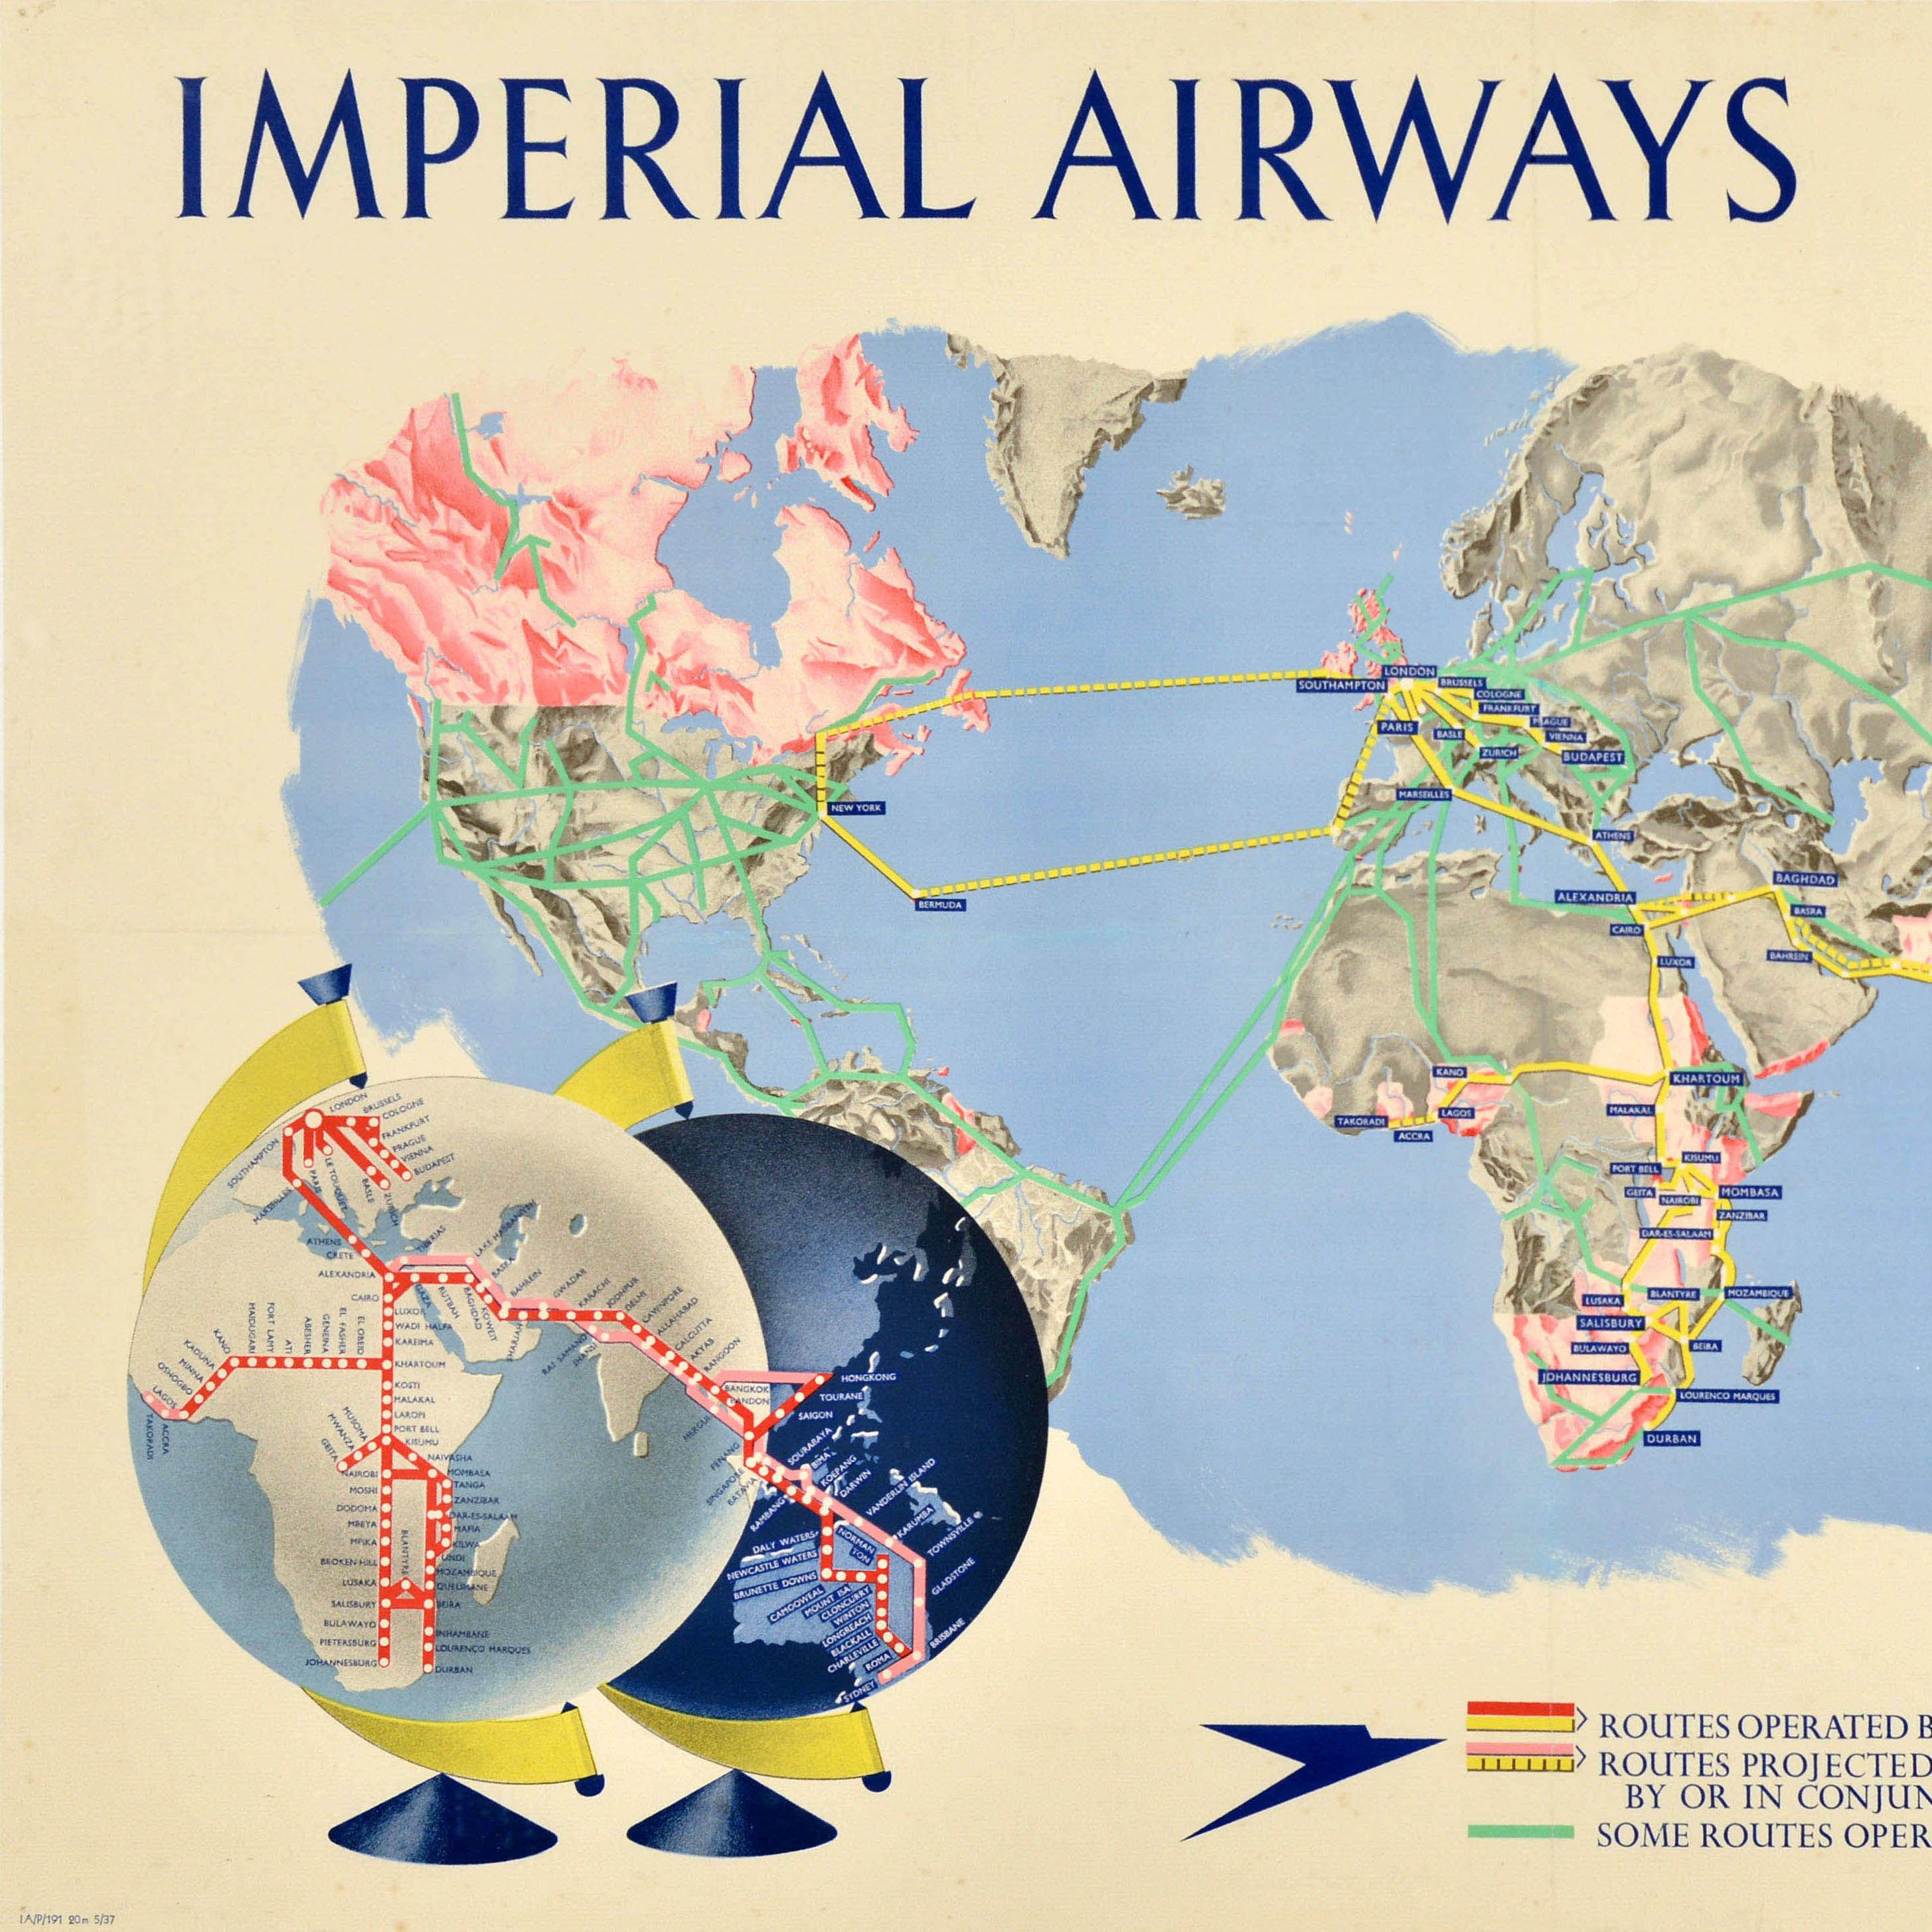 Original vintage travel poster for Imperial Airways showing a world map with the routes operated by Imperial Airways & Companies in Association featuring two planes with the weight, speed, crew and passenger details - an Ensign Air Liner and